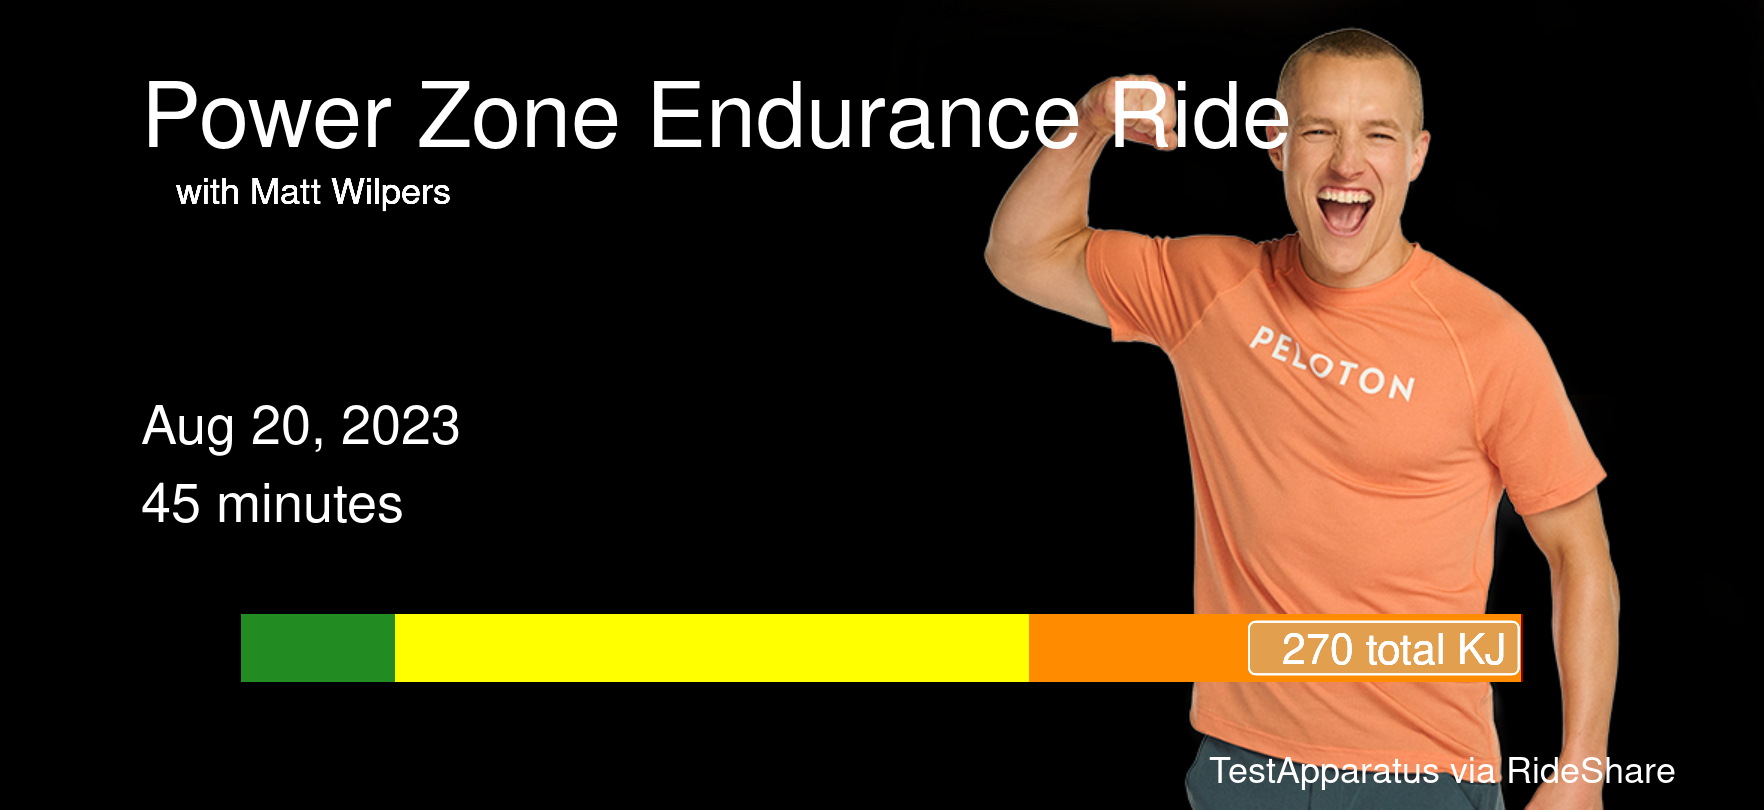 A Peloton ride share image, showing Matt Wilpers fist-pumping. It is a power zone endurance ride, 45 minutes long, and shows most of the time I was in the yellow heart rate zone (zone 3).